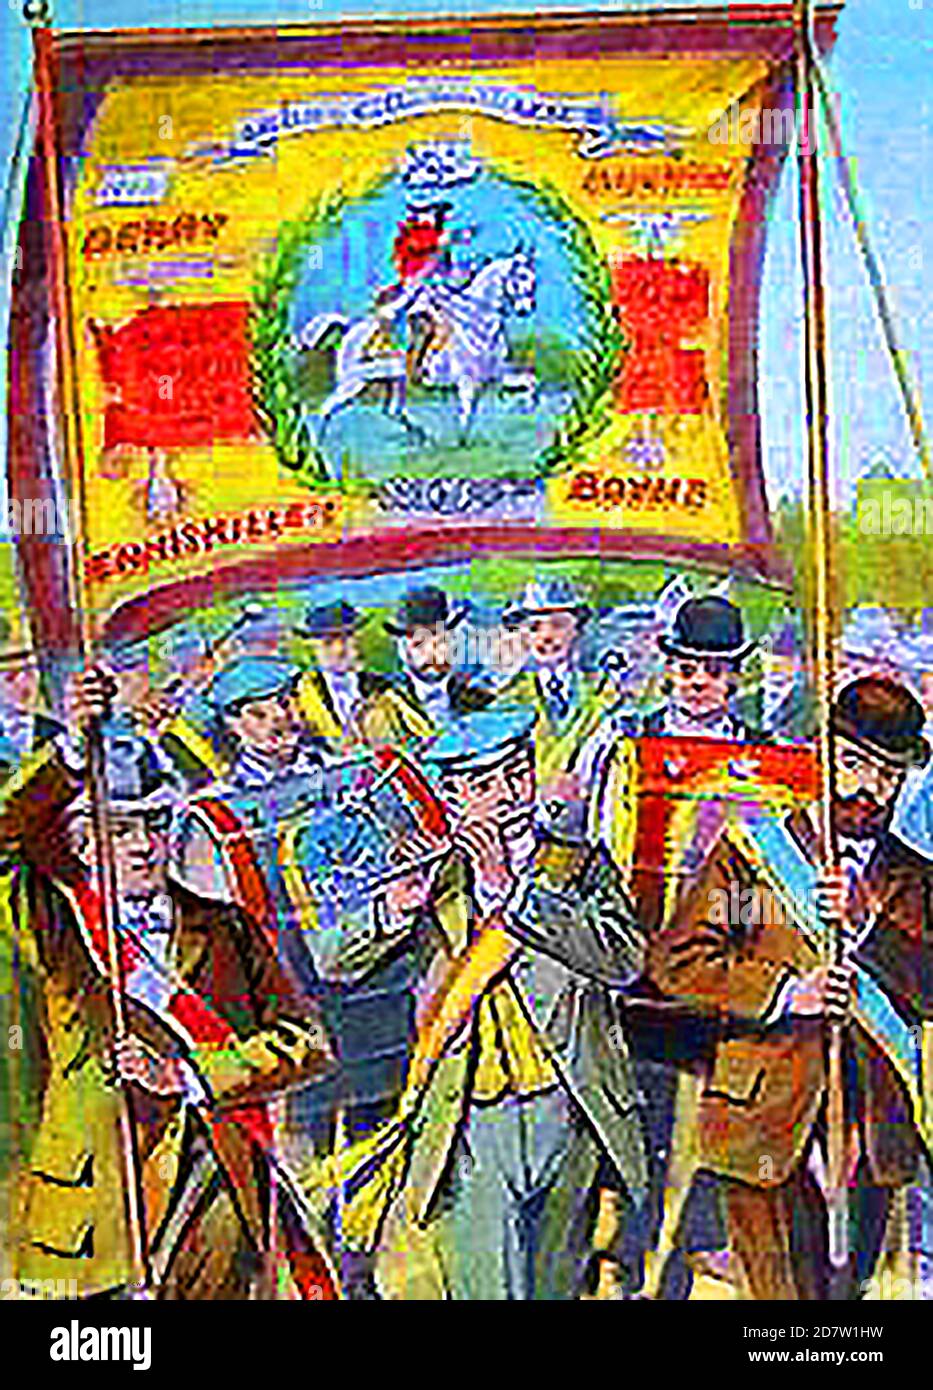 “Glorious Revolution” of 1688 - A 1912 postcard showing an Irish protestant march.  Dressed in bowler hats and orange sashes, thousands of people, mostly men, parade through villages, towns and cities across the region led by flute and drum players.  The Orange Order has been constant in Northern Ireland for 200 years often causing controversy  and sometimes violence. William of Orange, the Protestant Dutchman colloquially known as King Billy,claimed and succeeded to the thrones of Catholic King James II (England, Ireland & Scotland 1689-1702) Stock Photo